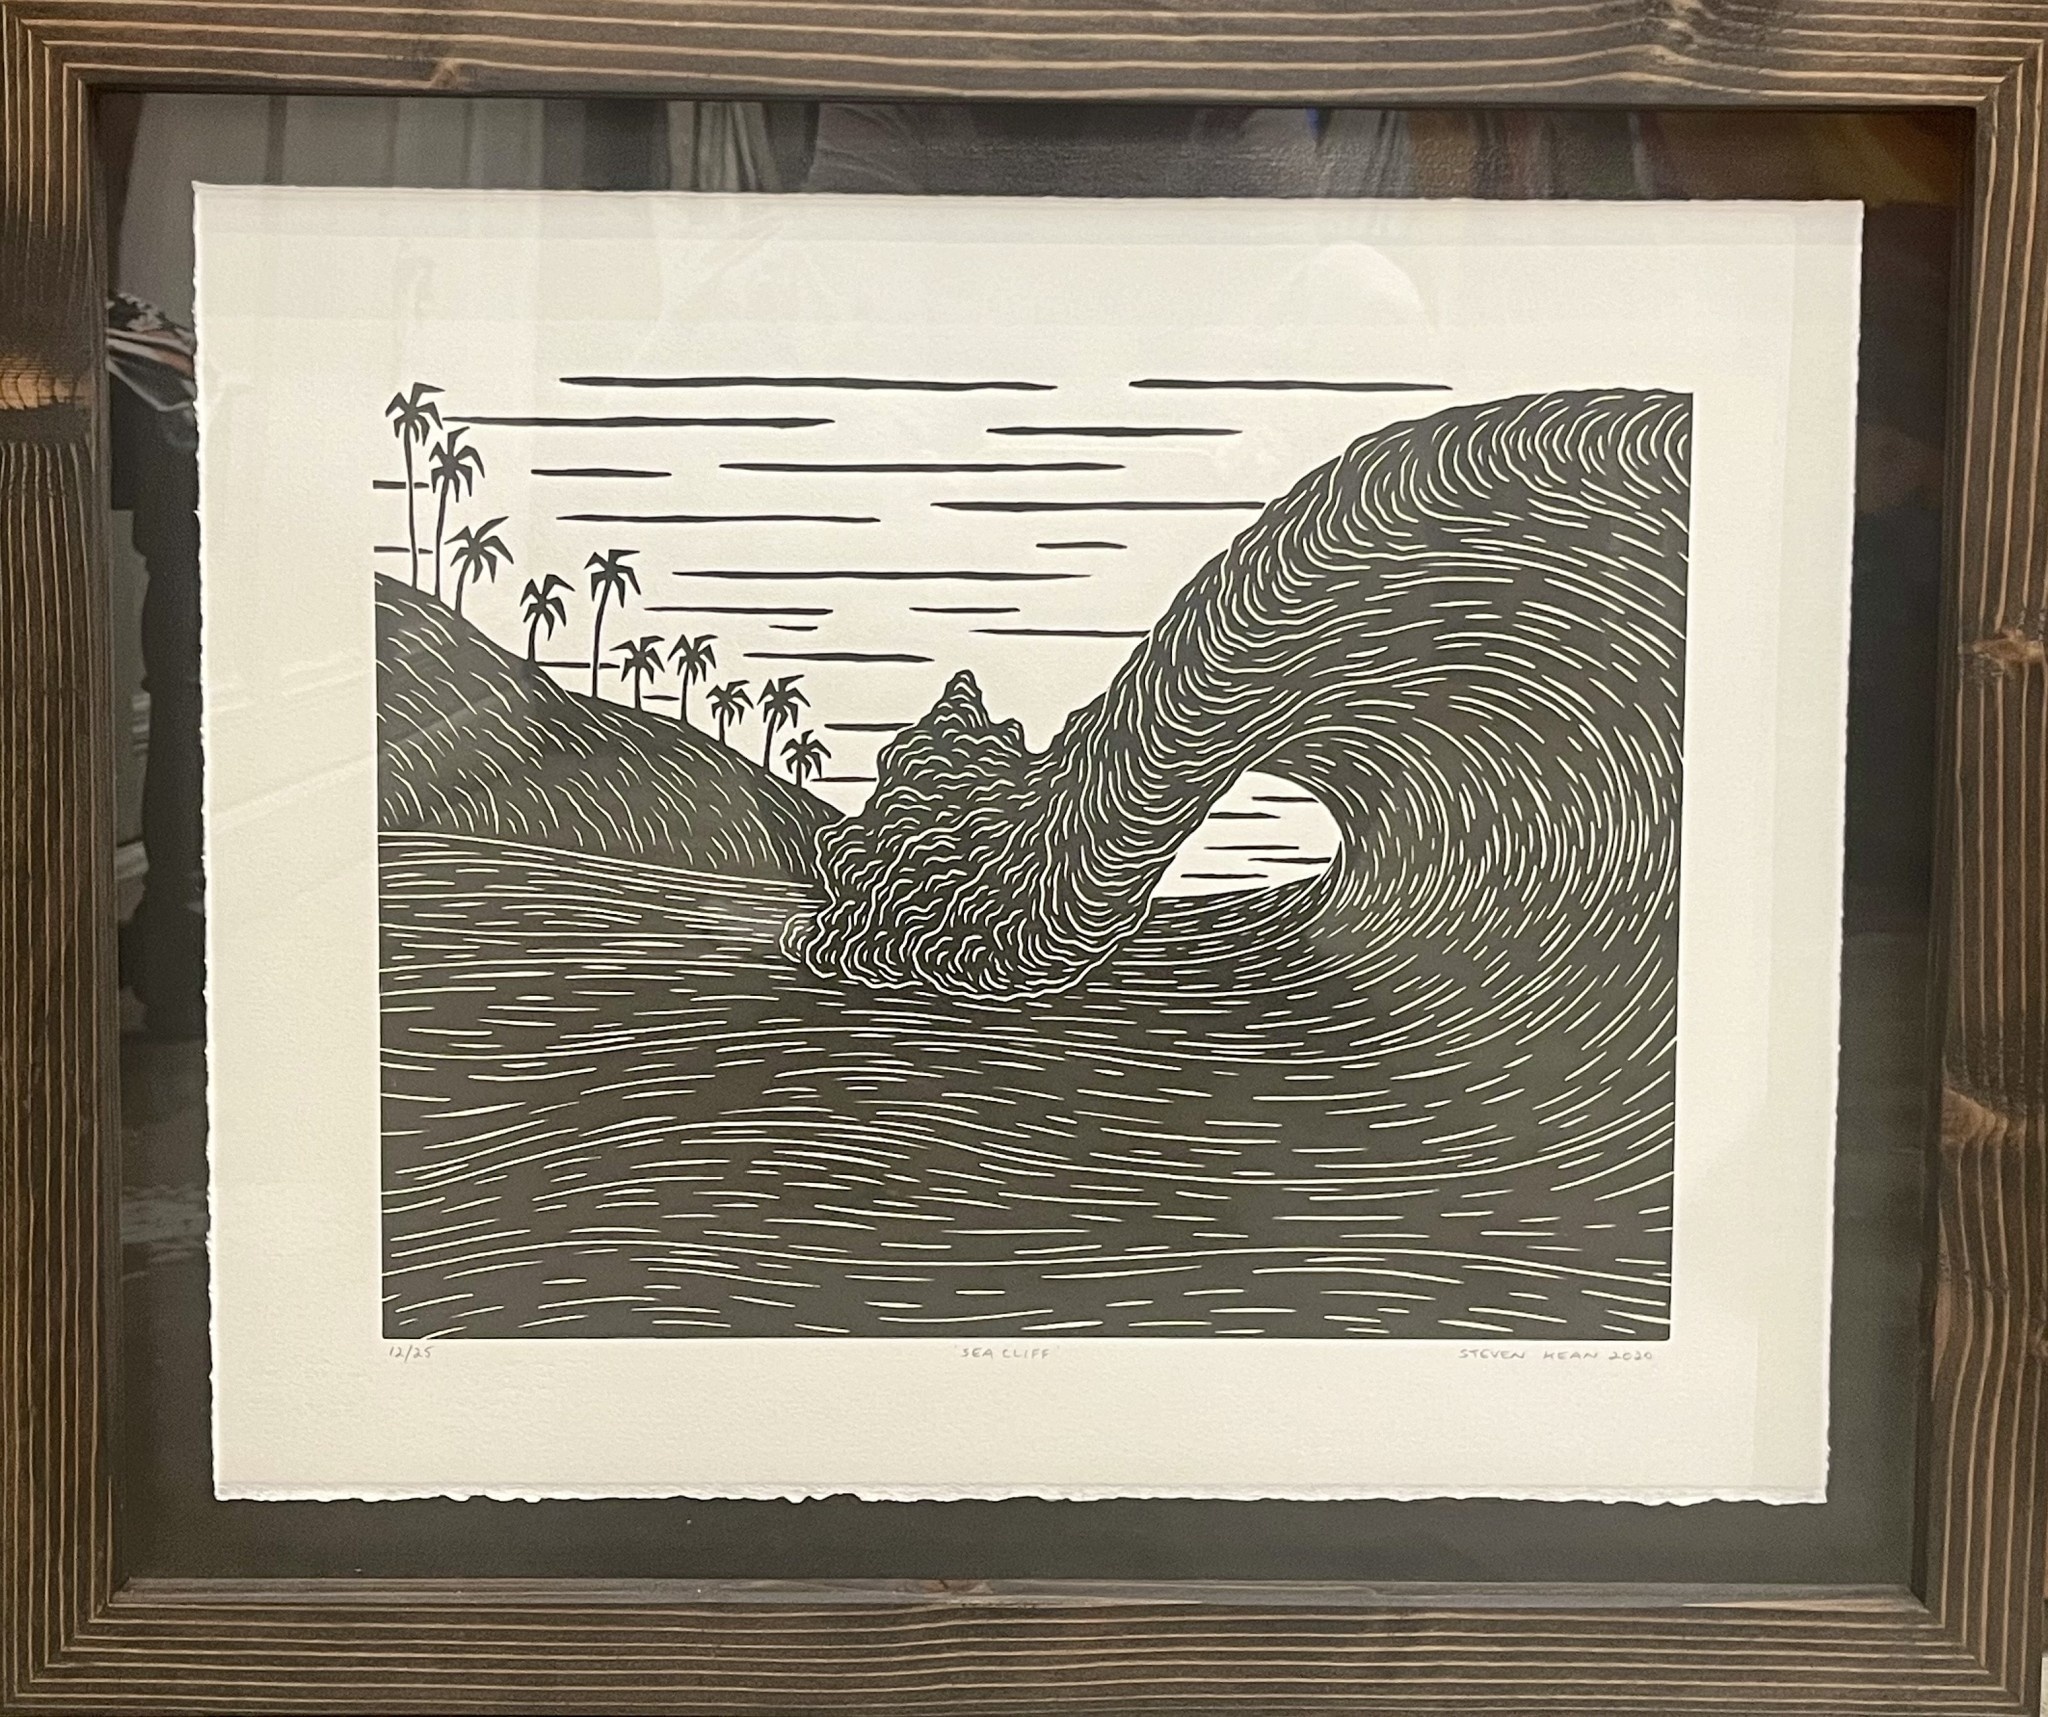 Kean Arts SEA CLIFF, FRAMED (Kiln Dried Douglas fir) ORIGINAL WOODCUT PRINT #12/25 ON HANDMADE WASHI PAPER, APPROX. 20”X16” WITH OUTER FRAME APPROX 25”X21”